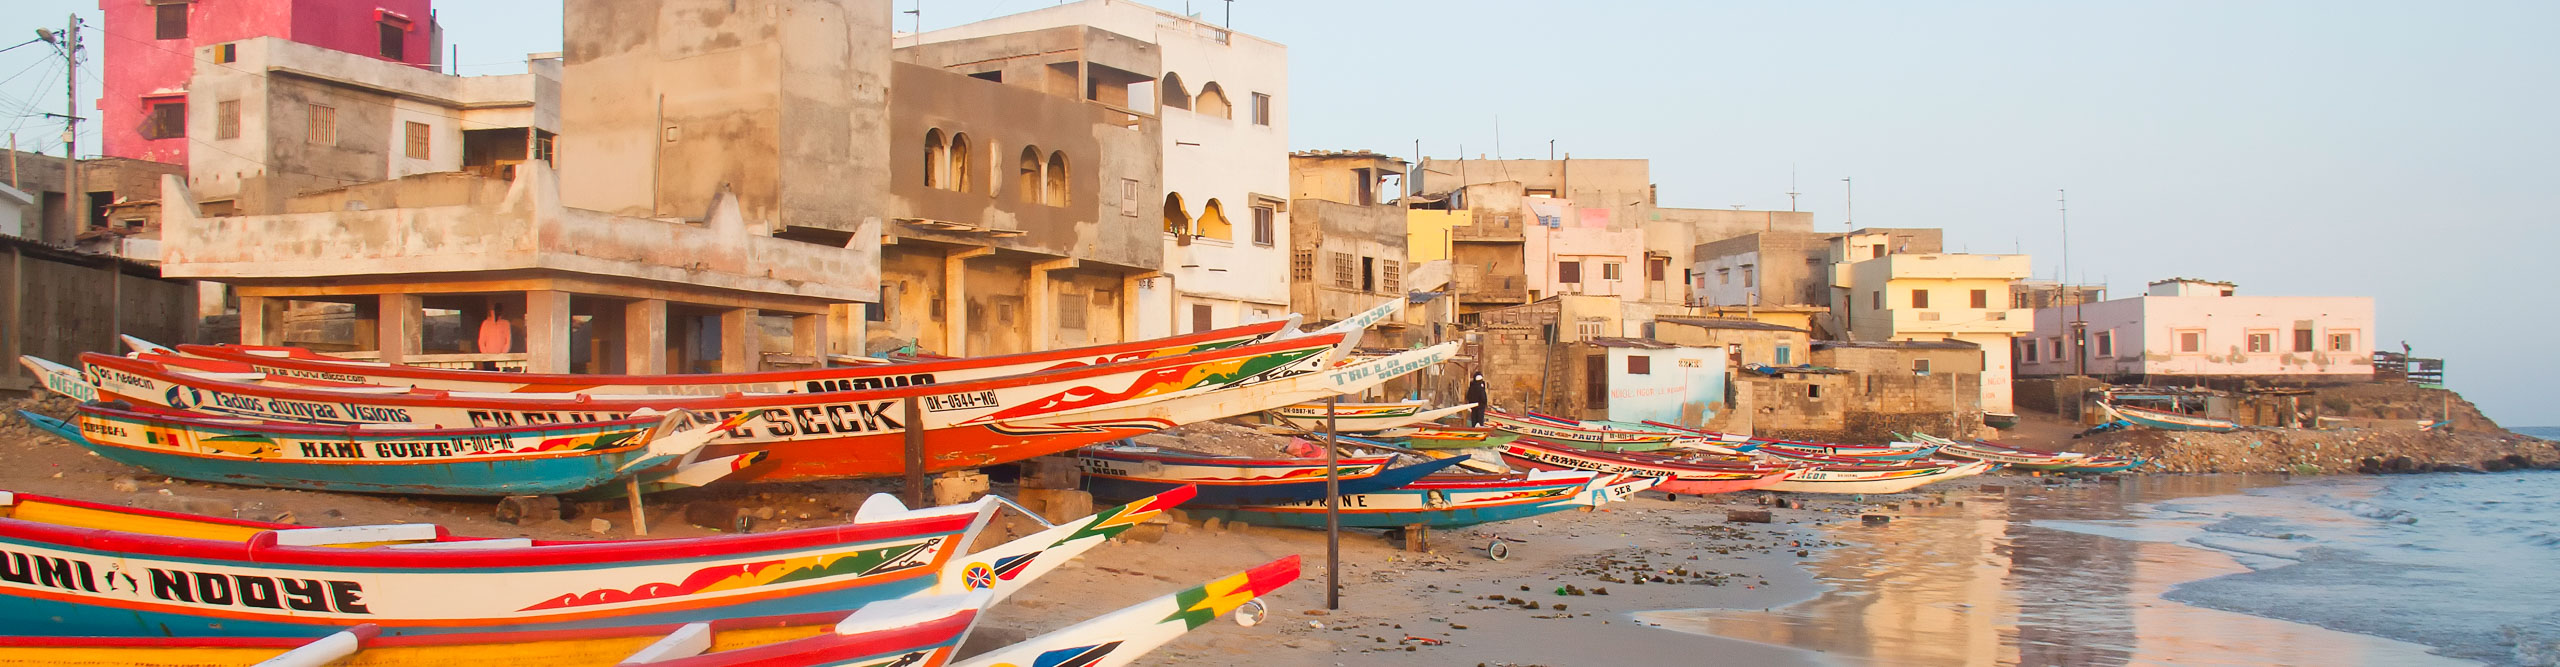 Fishing boats on Place N'Gor, with buildings in the background, Dakar, Senegal